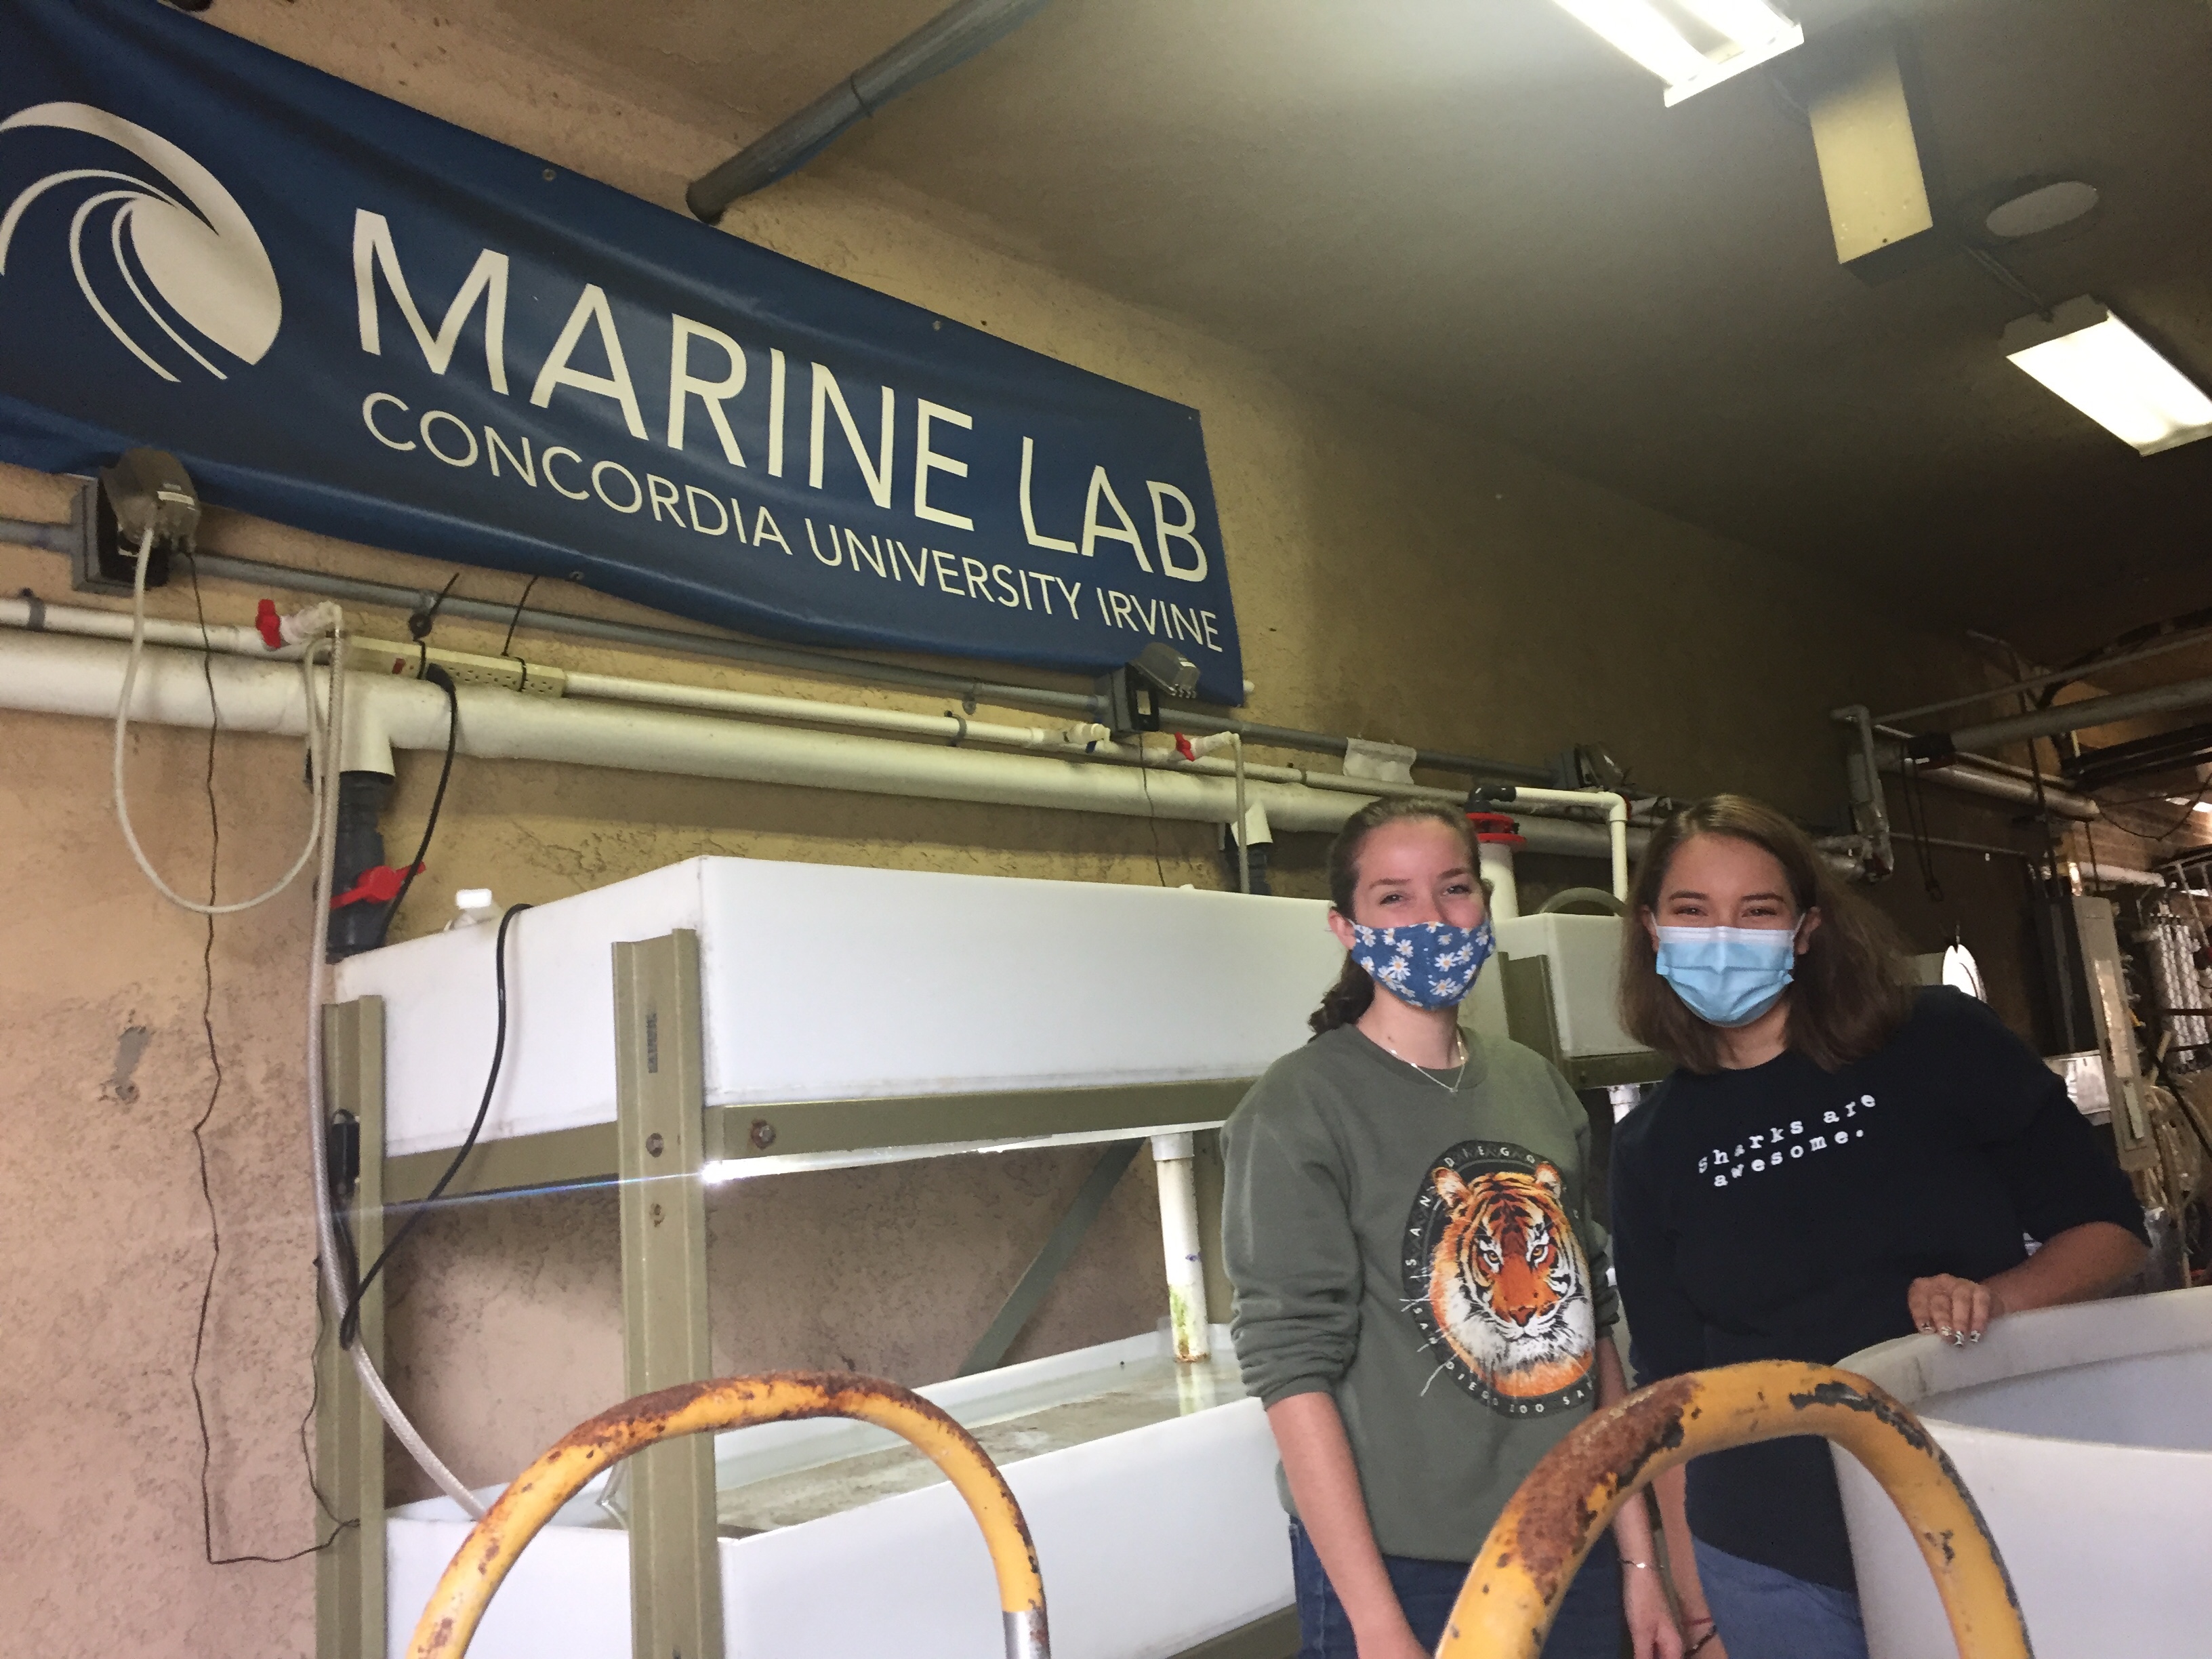 Students use the Marine Lab for research of Pismo Clams 